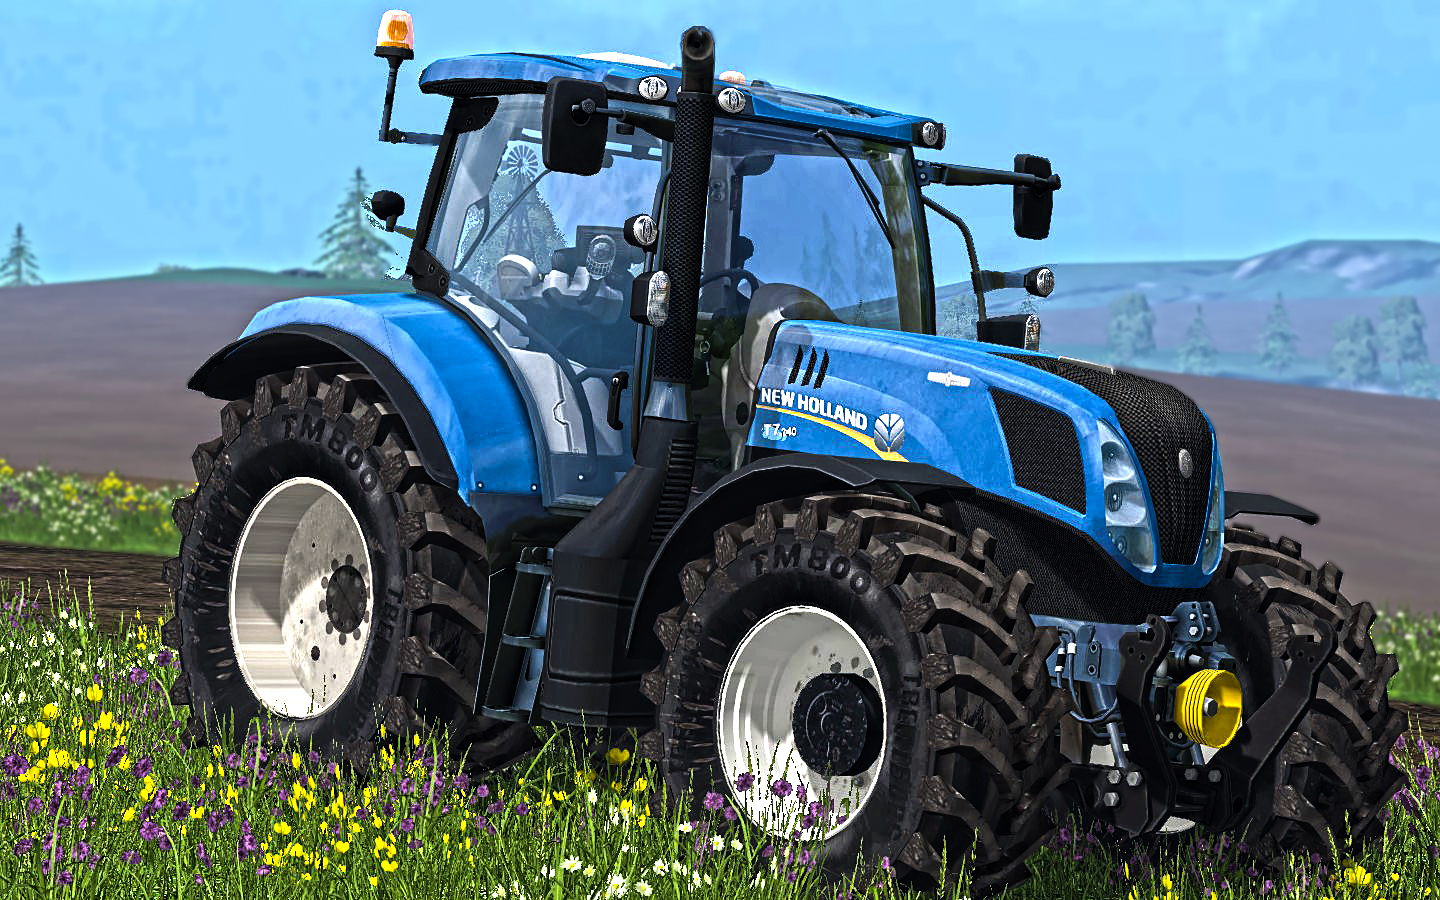 New Holland Backgrounds, Compatible - PC, Mobile, Gadgets| 1440x900 px